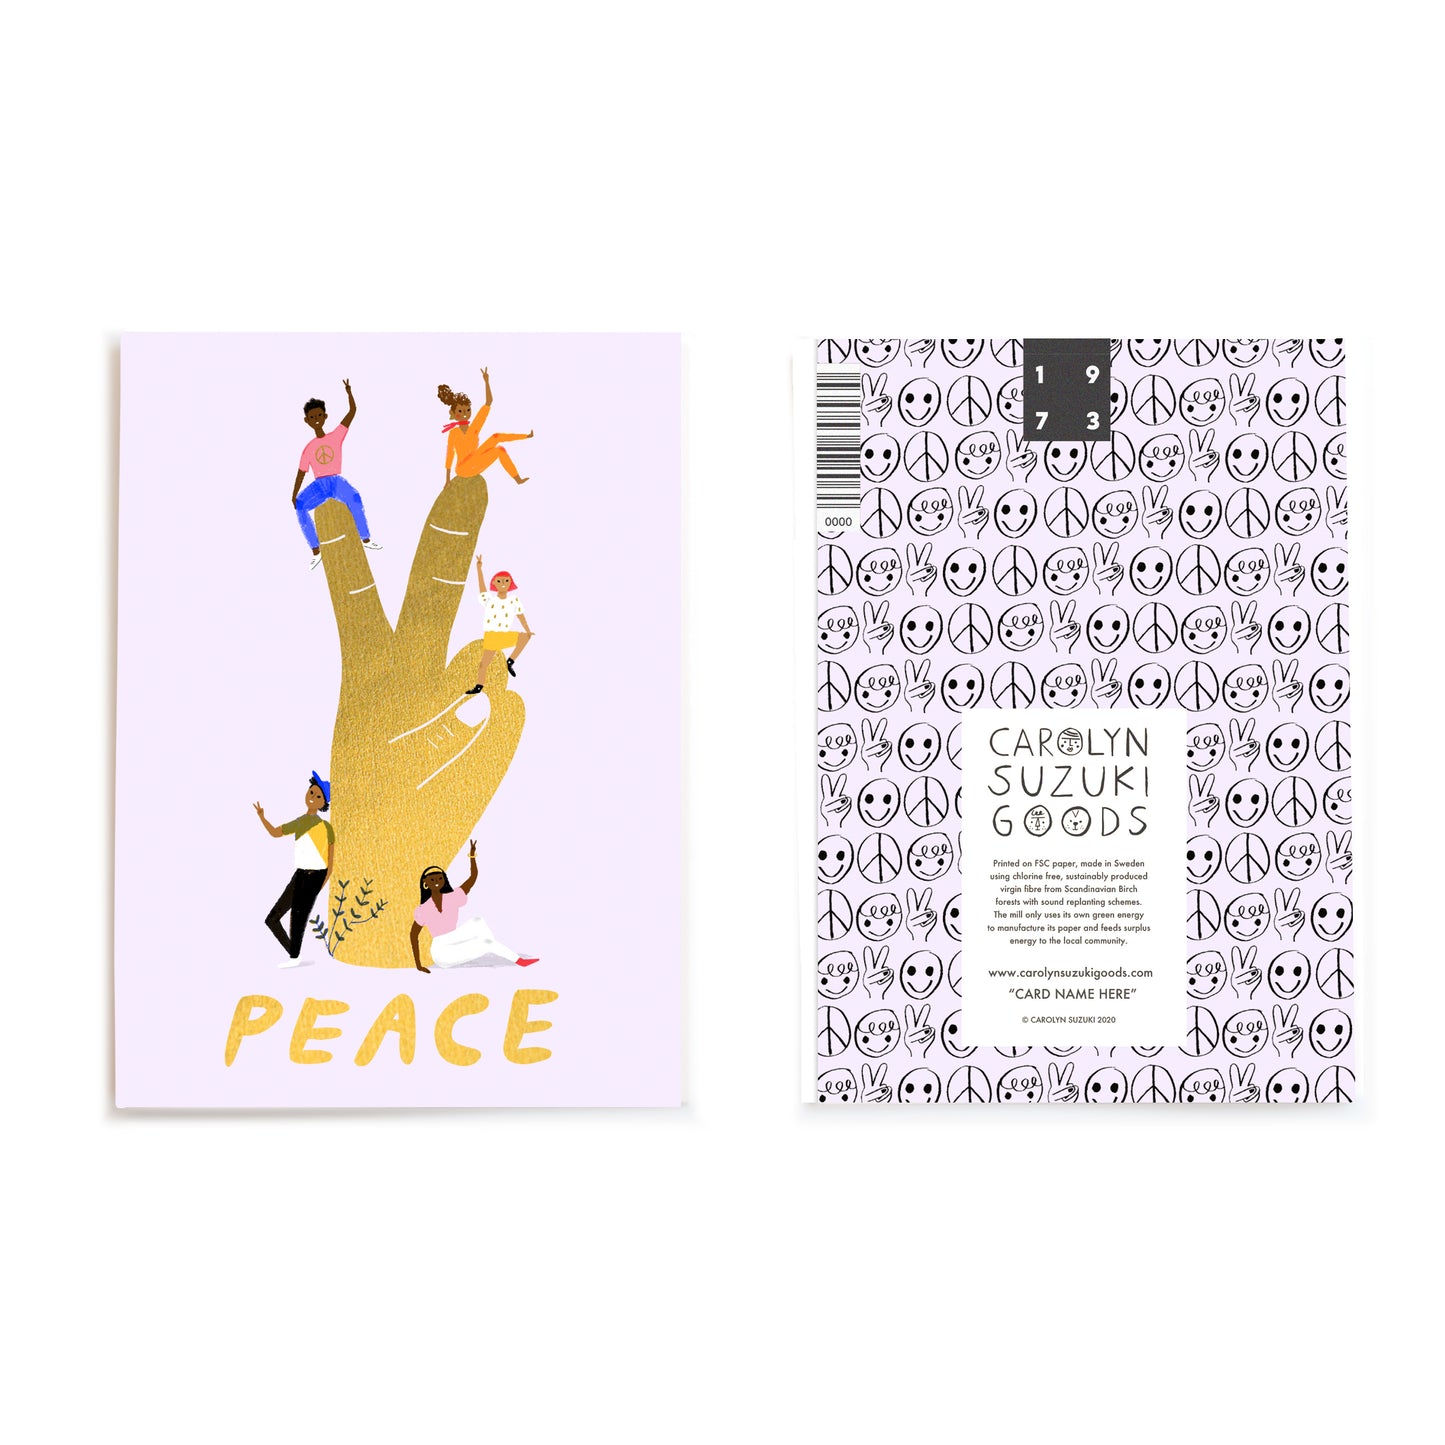 PEACE SCULPTURE - Holiday Card